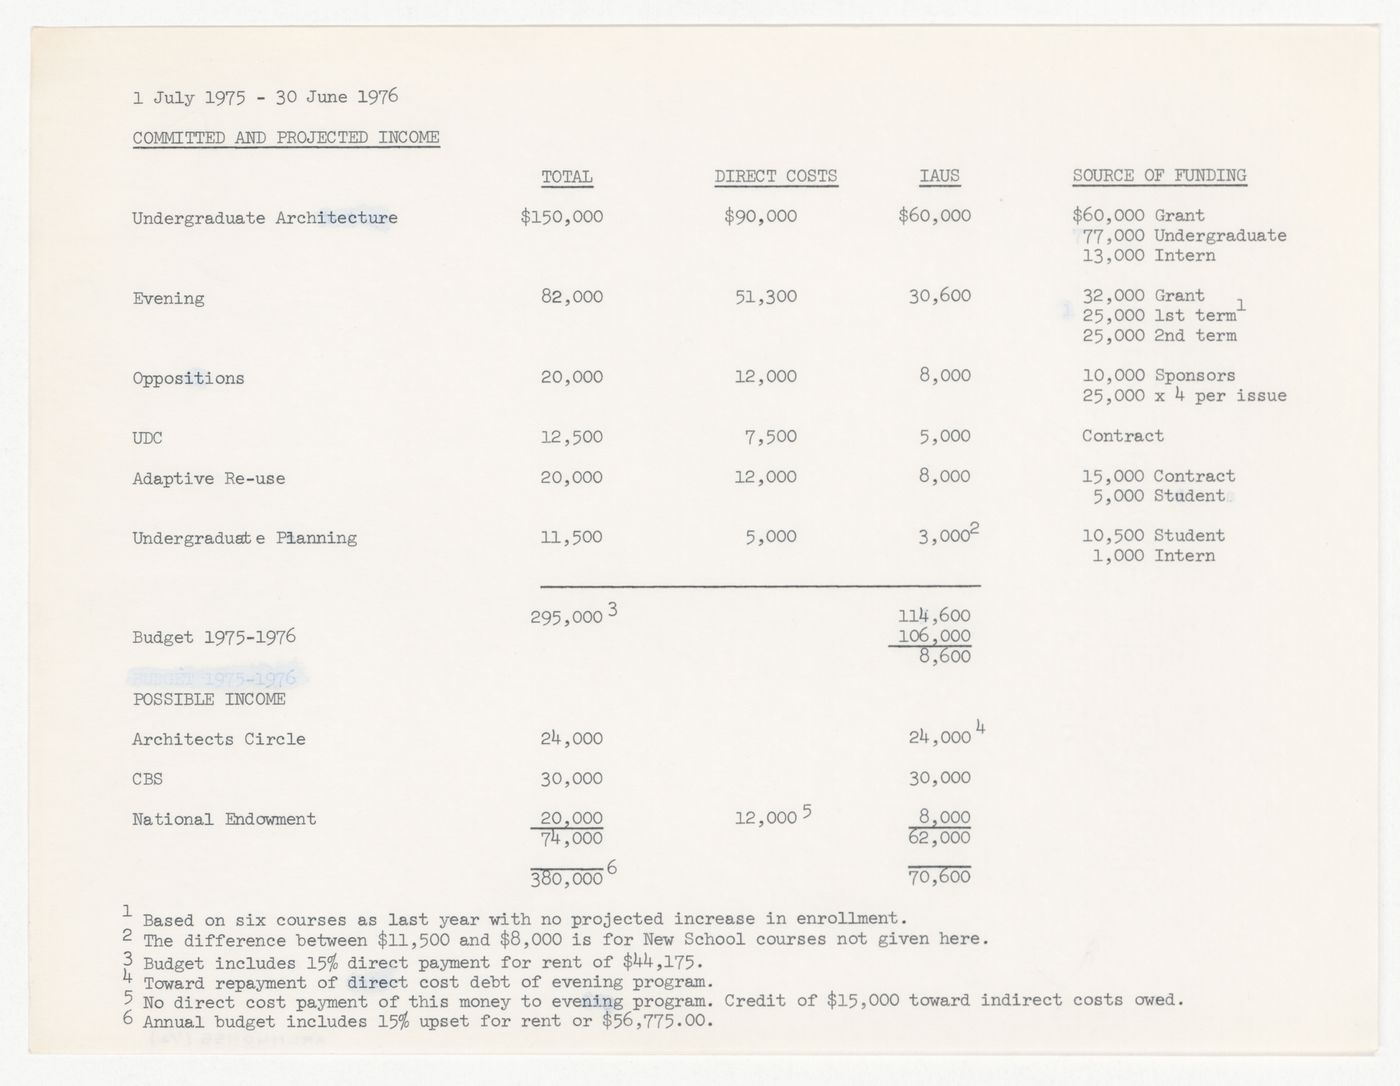 Committed and projected income with attached dept repayment schedule from July 1st, 1975 to June 30th, 1976